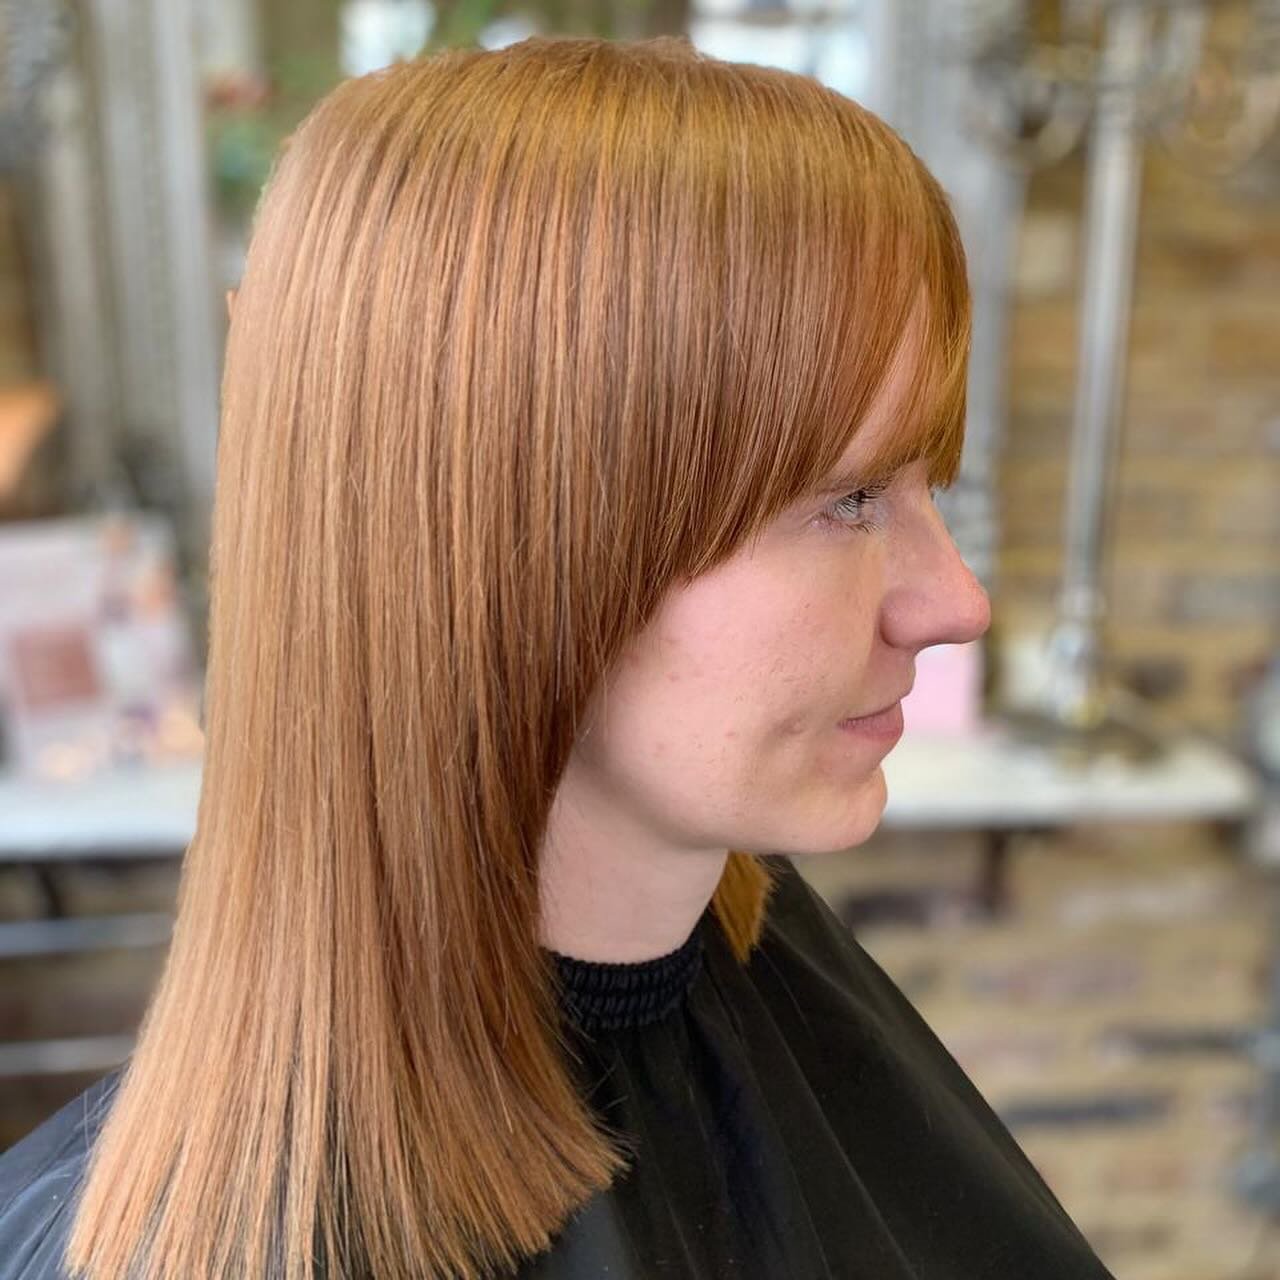 Copper &amp; unique shapes for Spring/Summer 🧡
Book your hair transformation with us at newcrosshair.com x